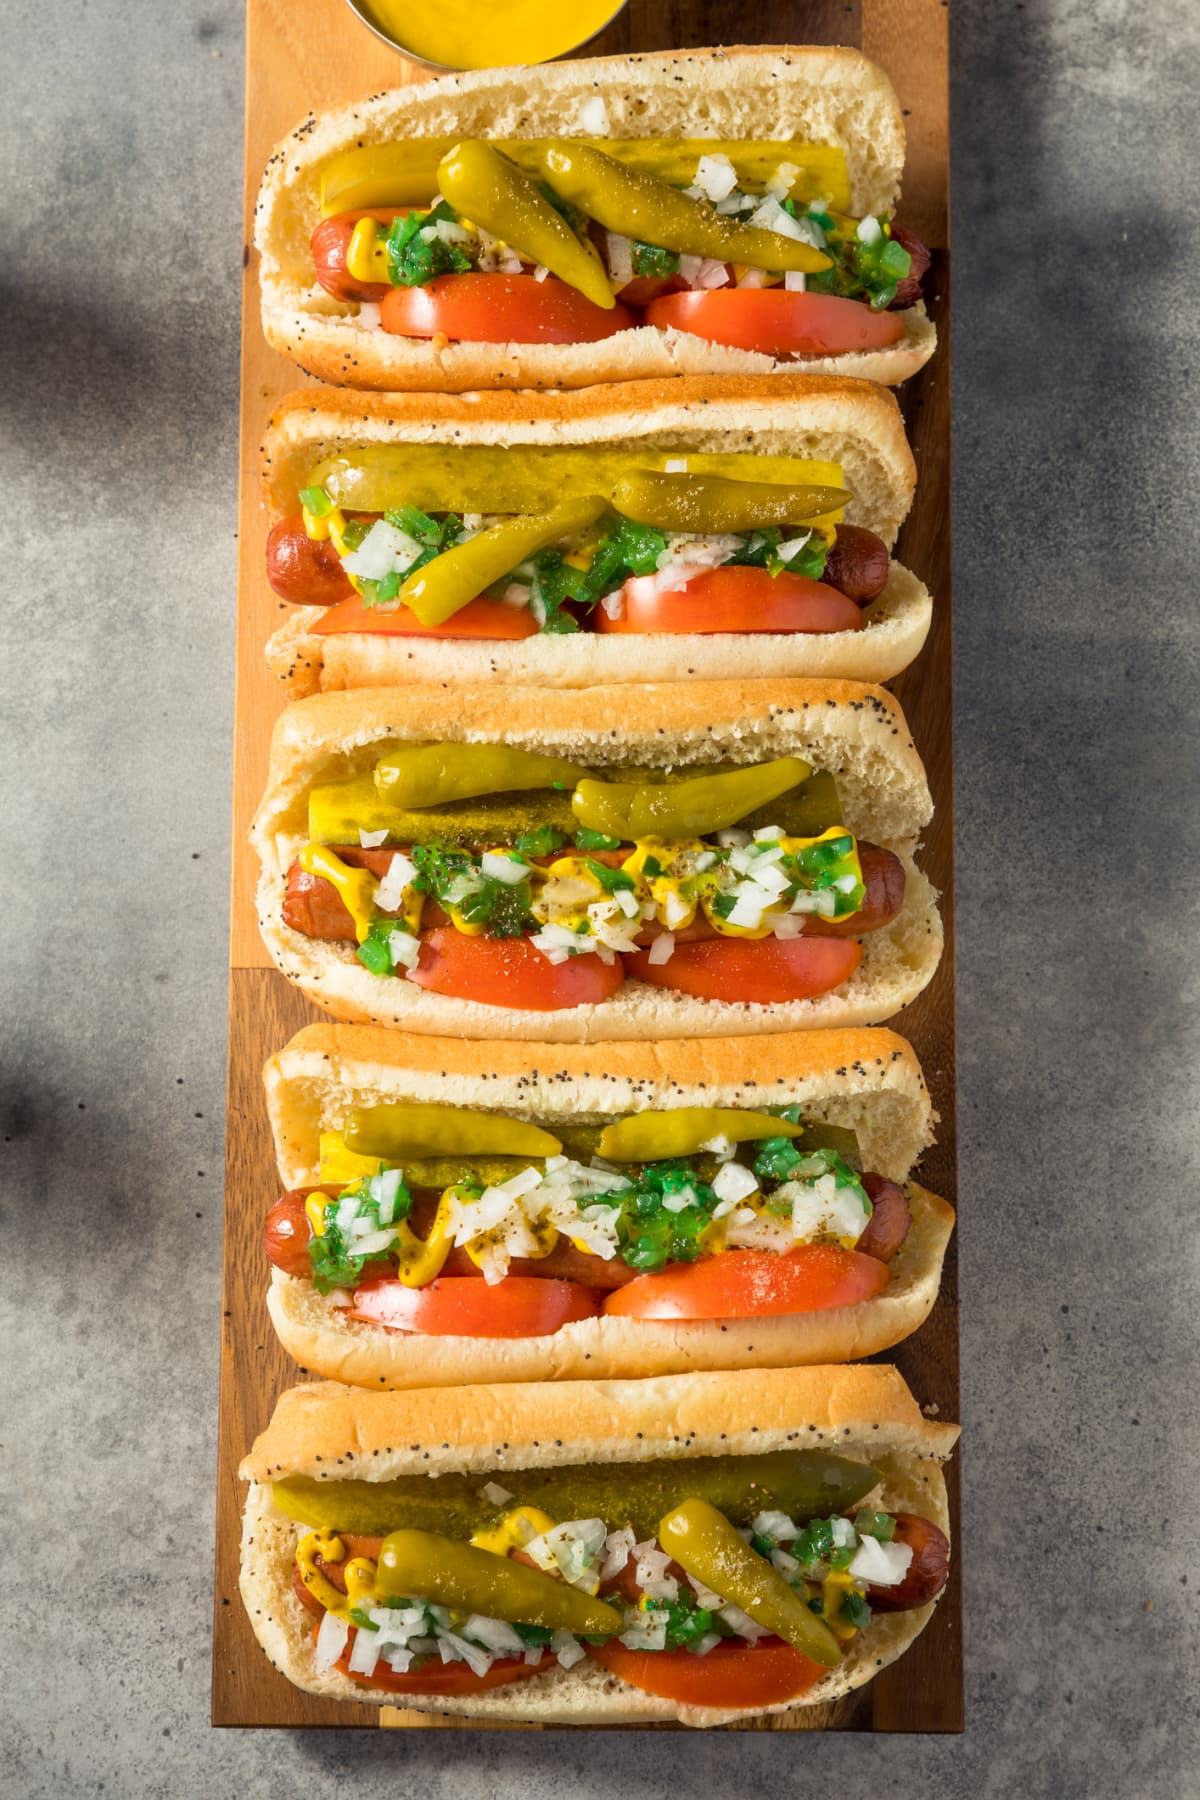 Homemade Chicago Style Hot Dogs with Tomato Onion and Peppers